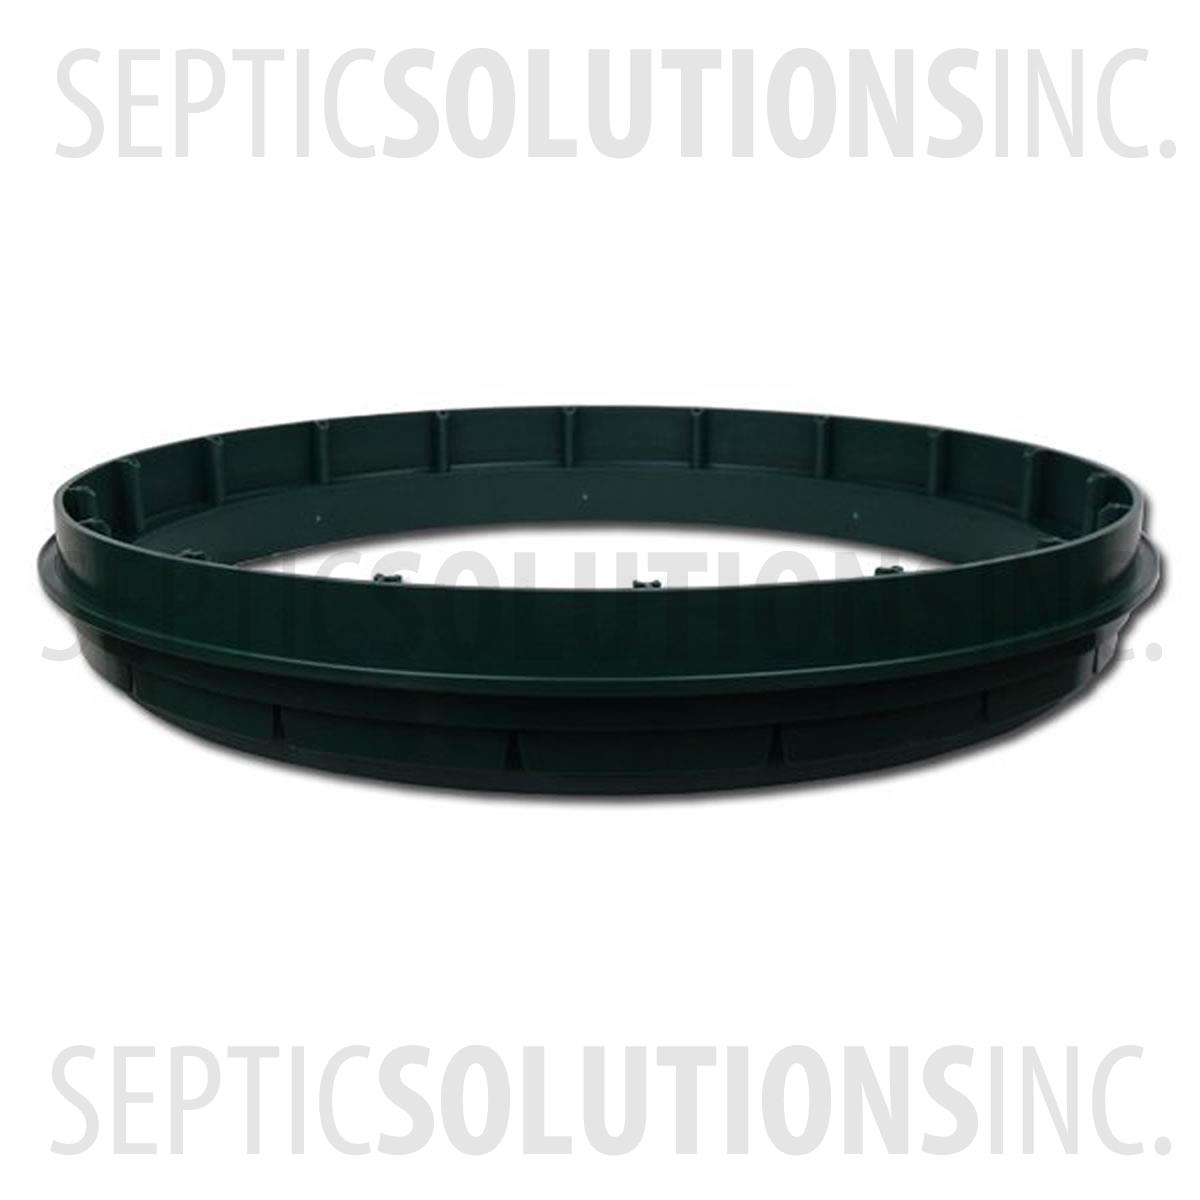 Polylok 3009-SS 20" Safety Screen for Septic Risers 